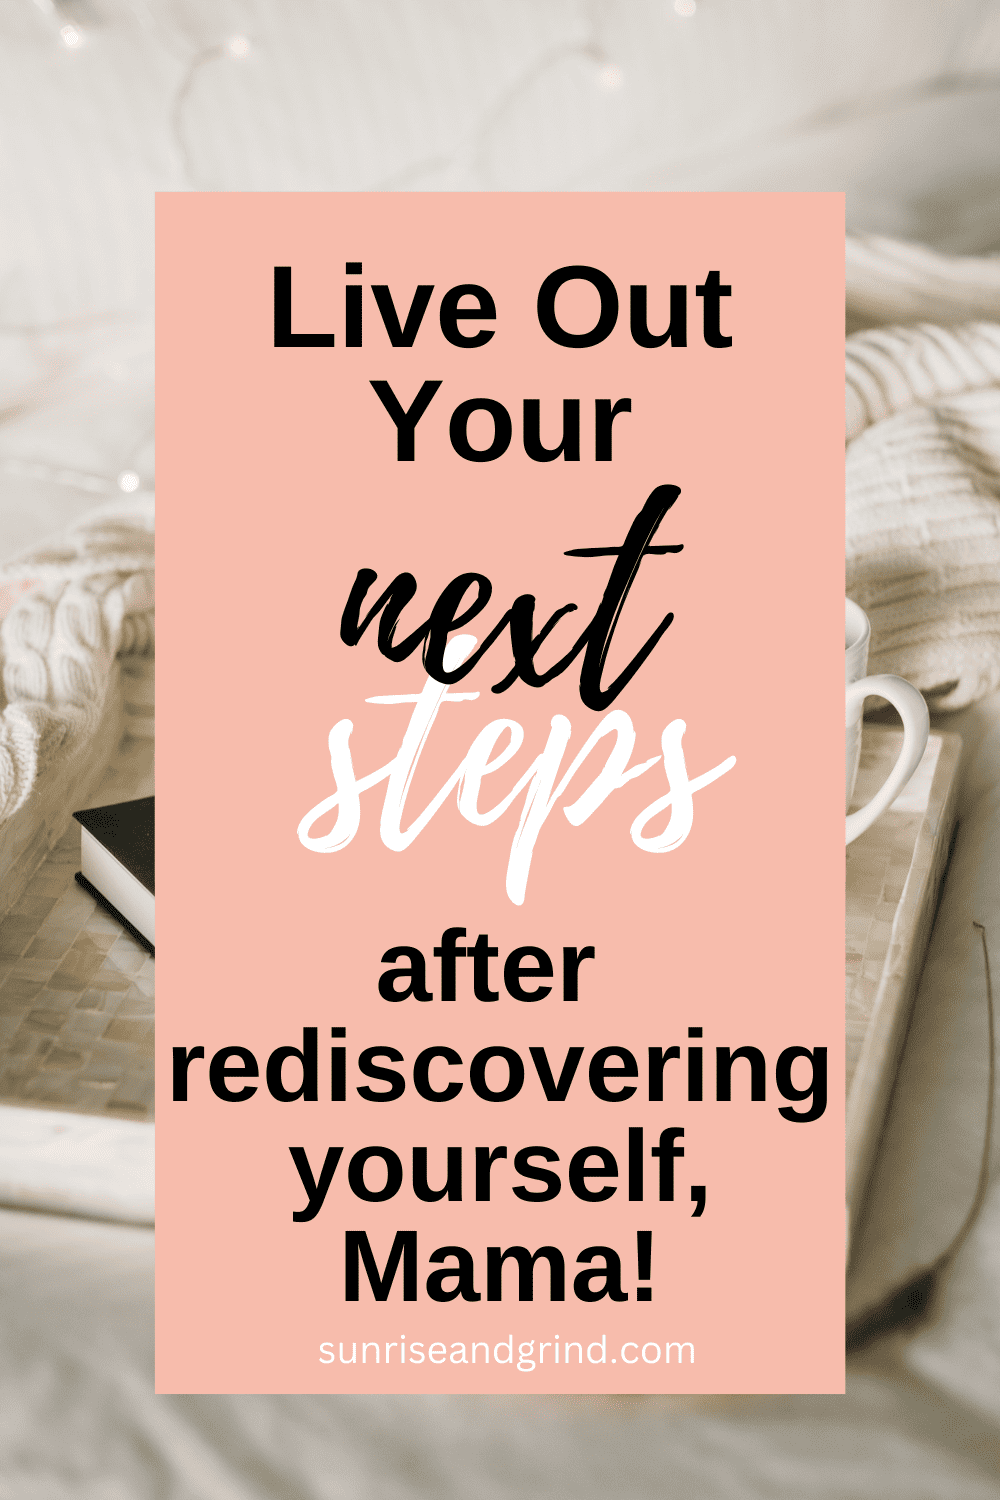 Live-out-your-next-steps